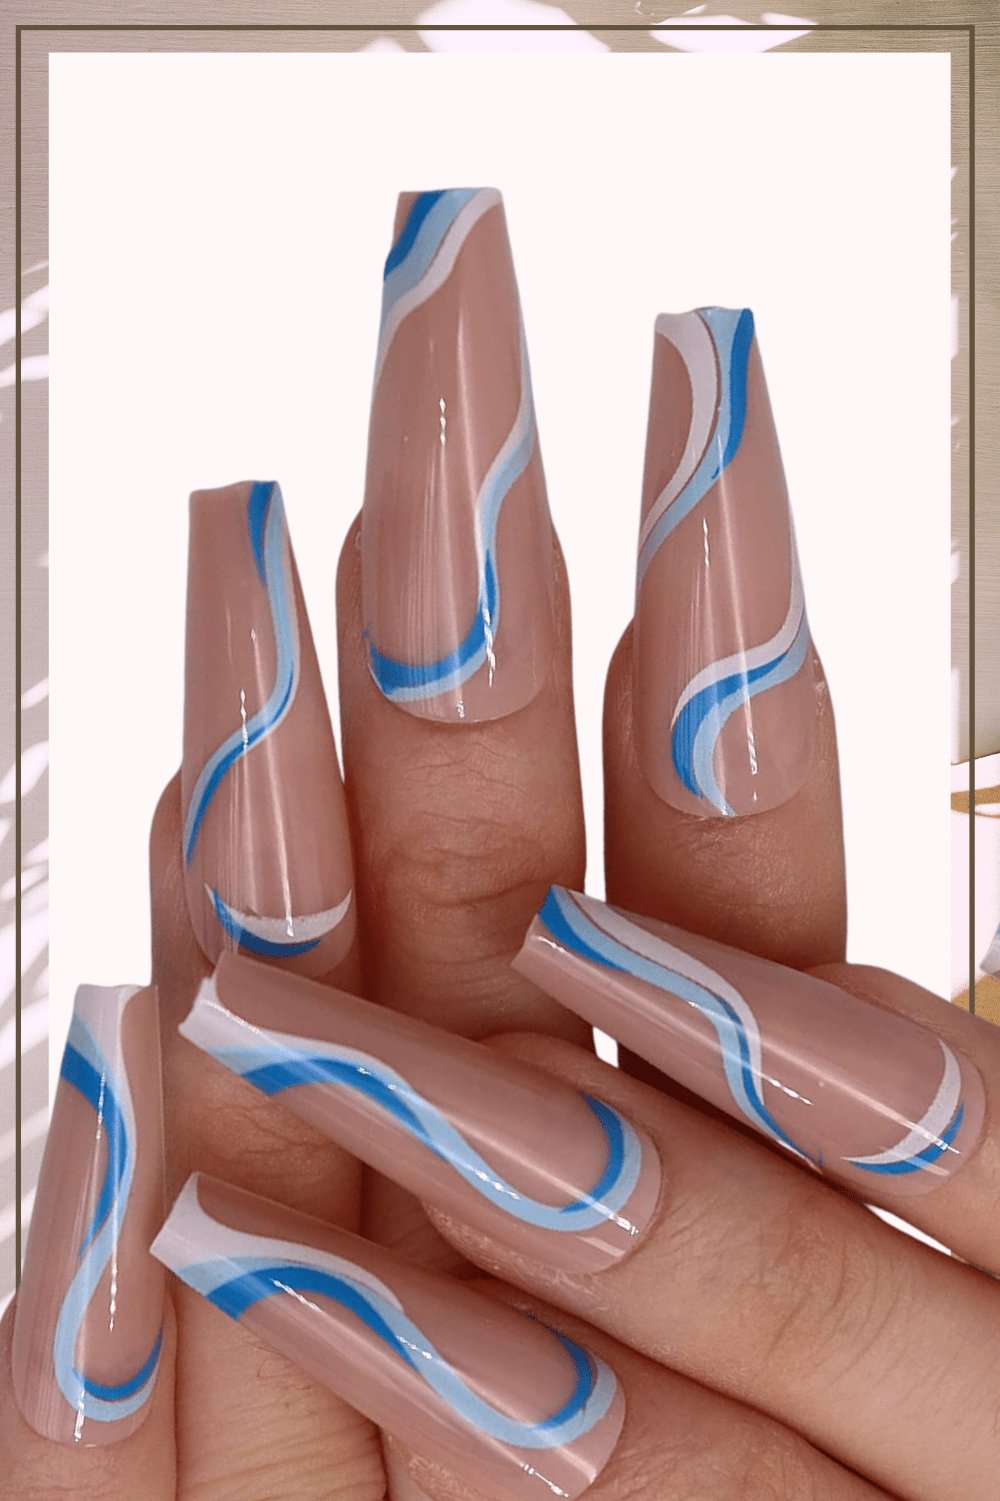 Blue And White Swirl Coffin Press On Nails Kit - TGC Boutique - Press On Nails